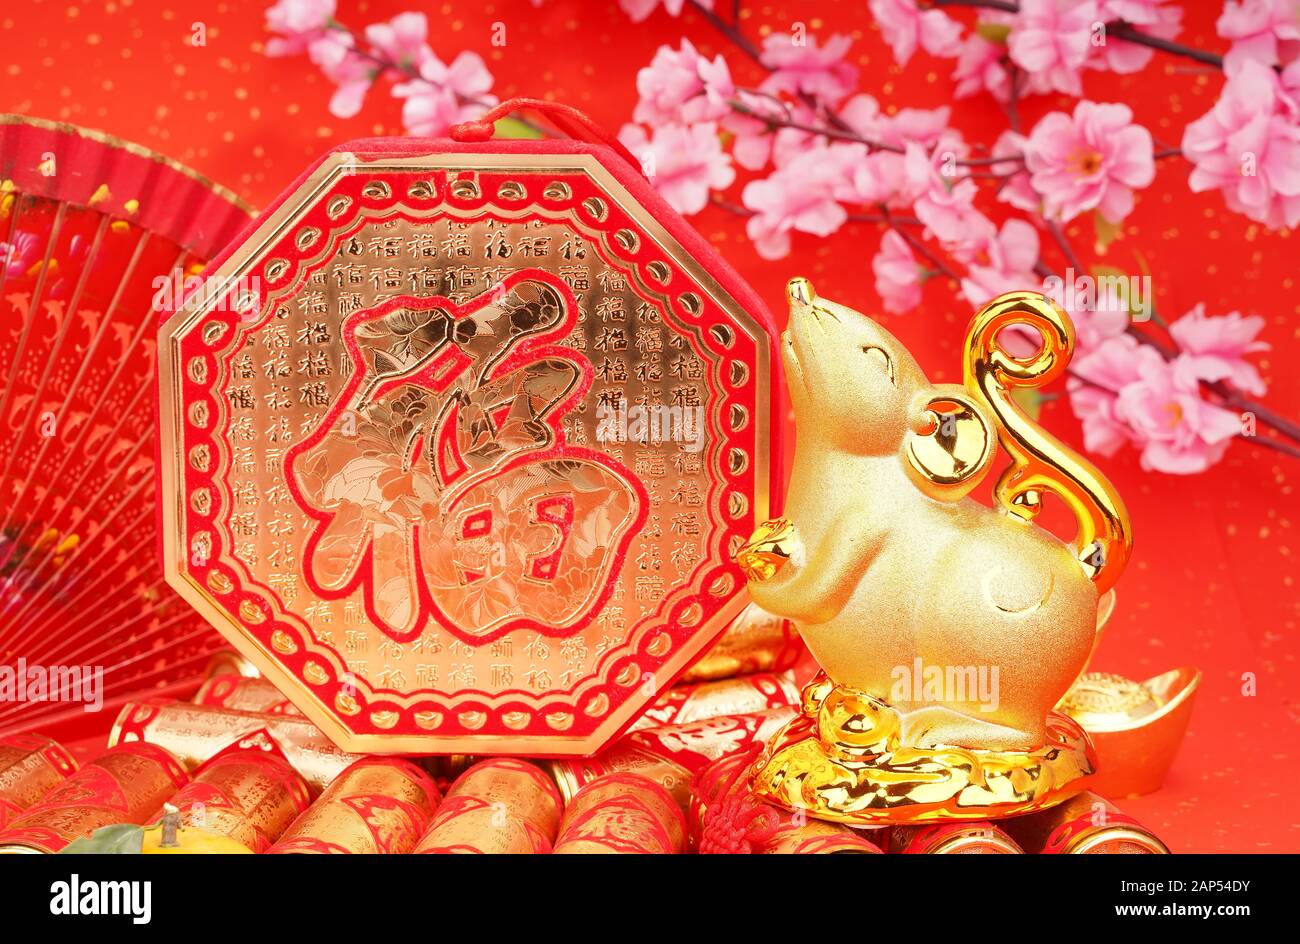 Tradition Chinese golden rat statue rat,2020 is year of the rat,Chinese characters on gold ingot translation: good bless for money. Stock Photo